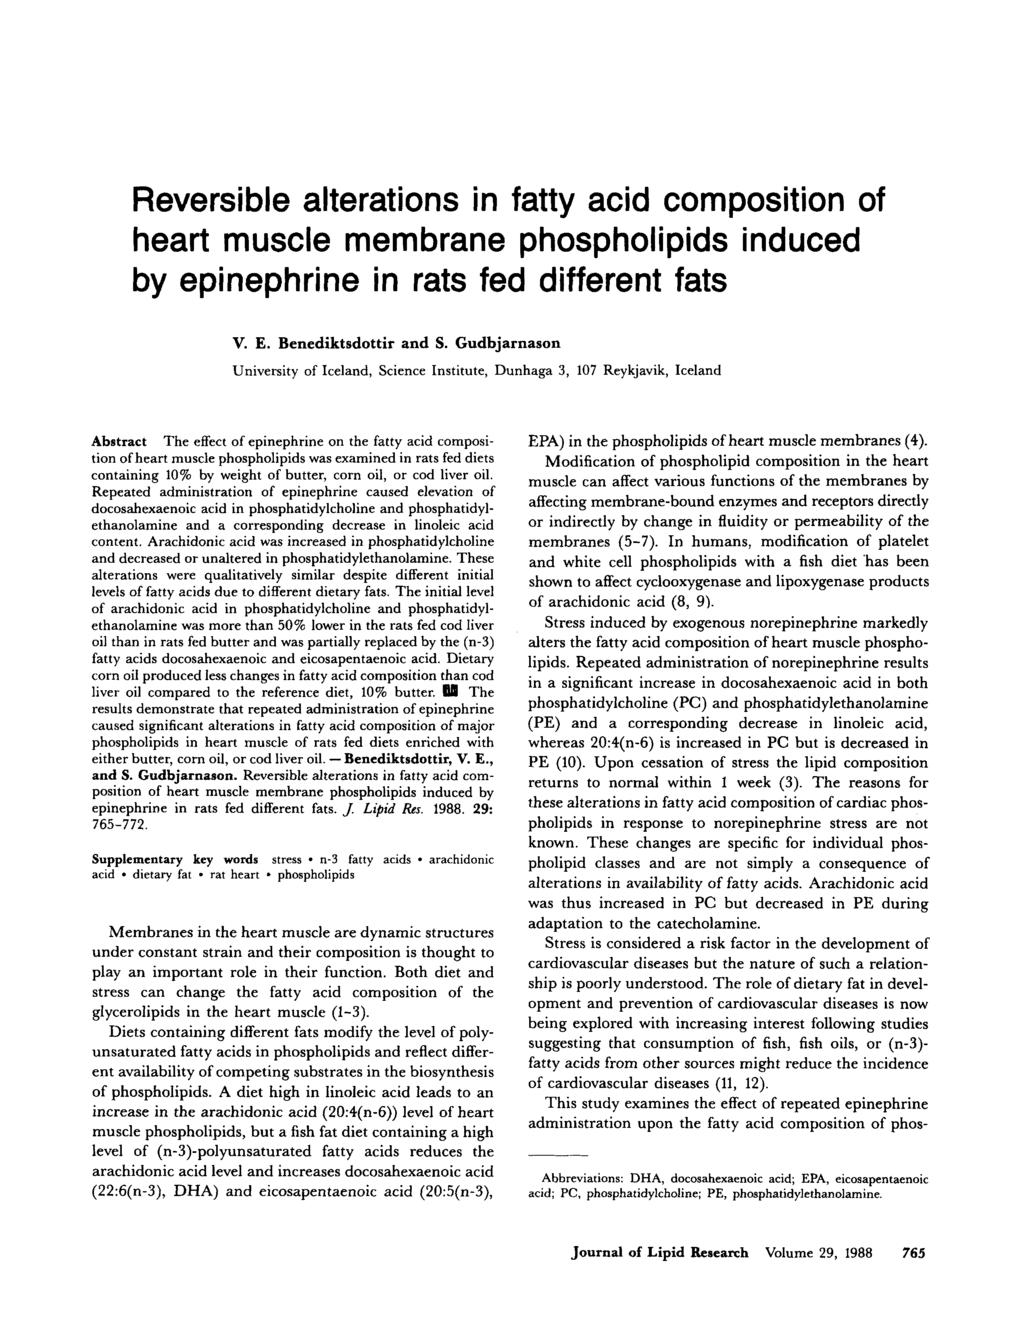 Reversible alterations in fatty acid composition of heart muscle membrane phospholipids induced by epinephrine in rats fed different fats V. E. Benediktsdottir and S.